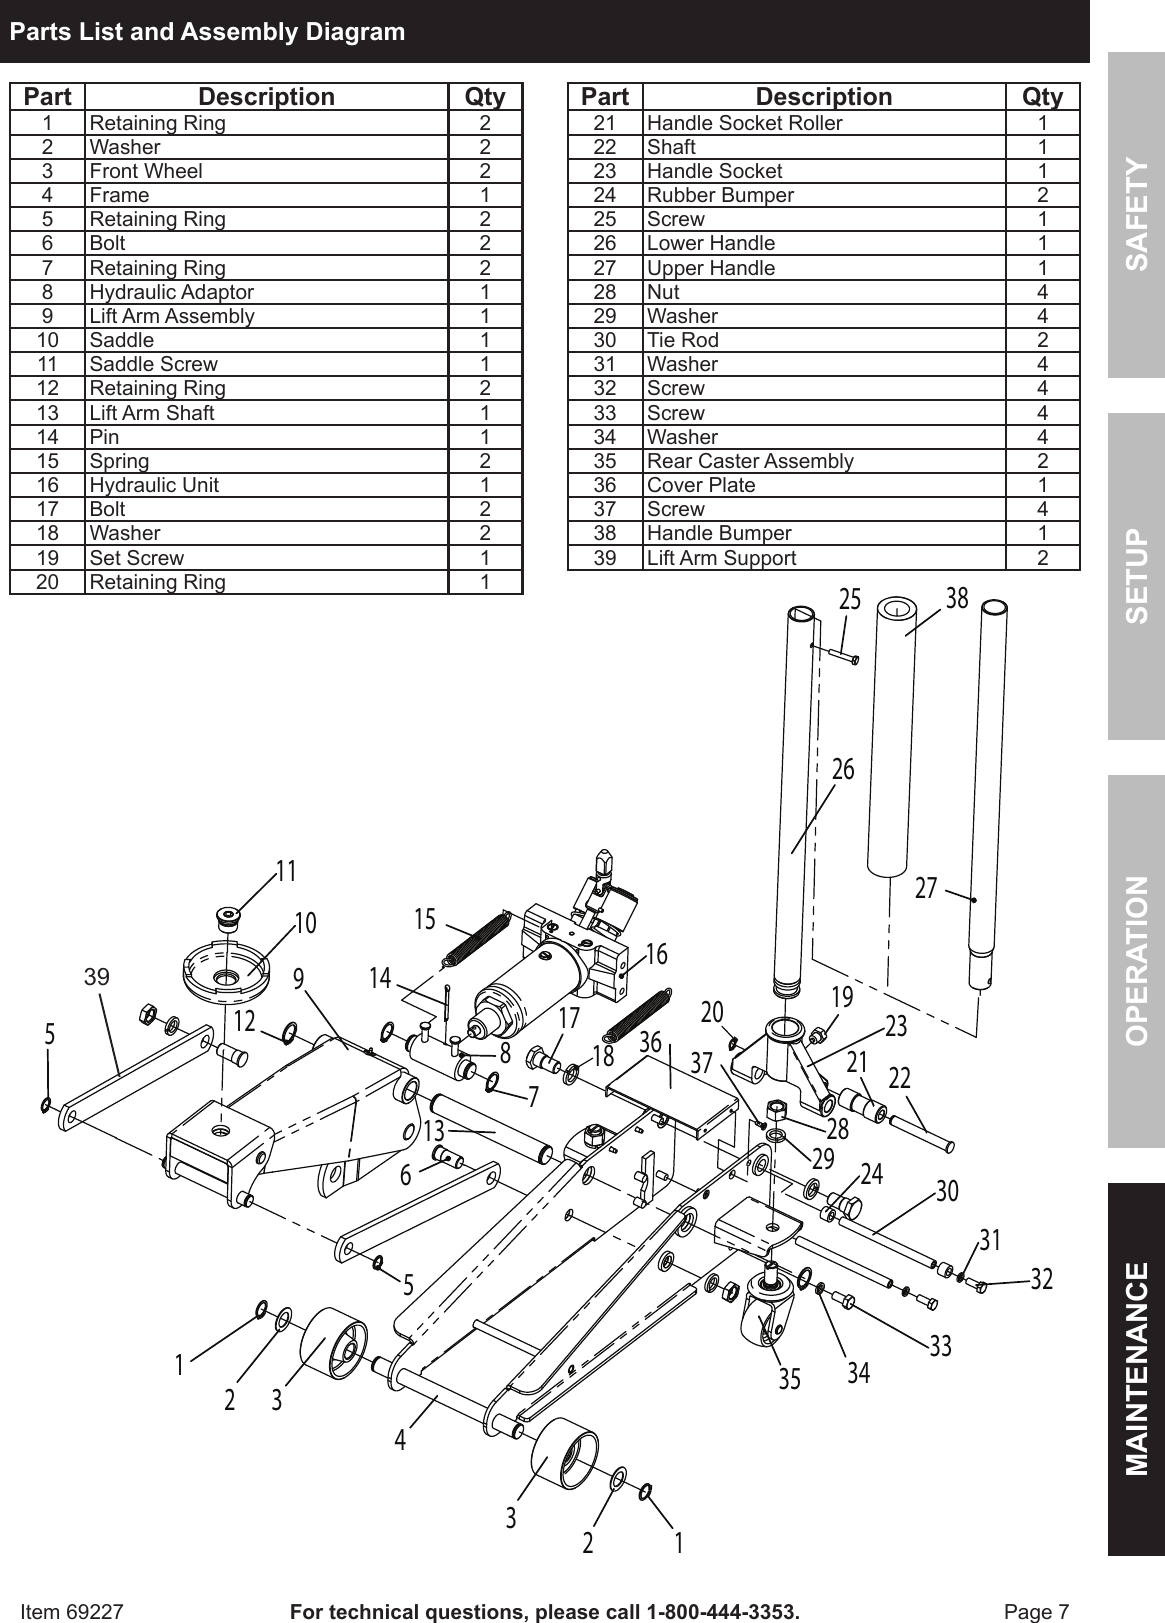 Page 7 of 8 - Harbor-Freight Harbor-Freight-69227-Owner-S-Manual